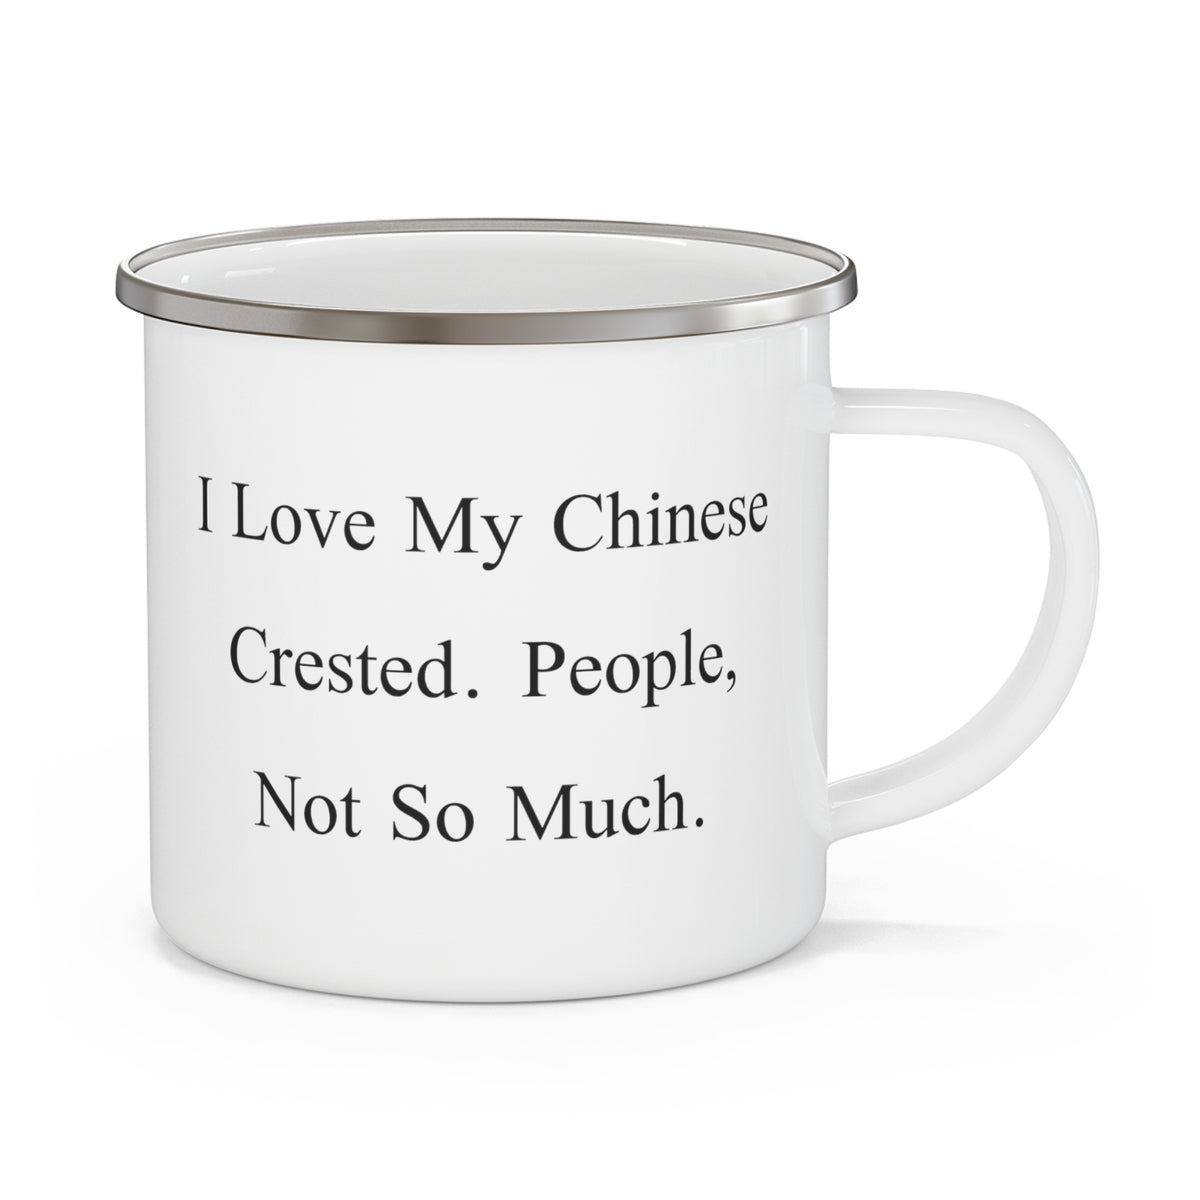 Unique Idea Chinese Crested Dog Gifts, I Love My Chinese Crested. People, Not So Much, Reusable 12oz Camper Mug For Pet Lovers From Friends